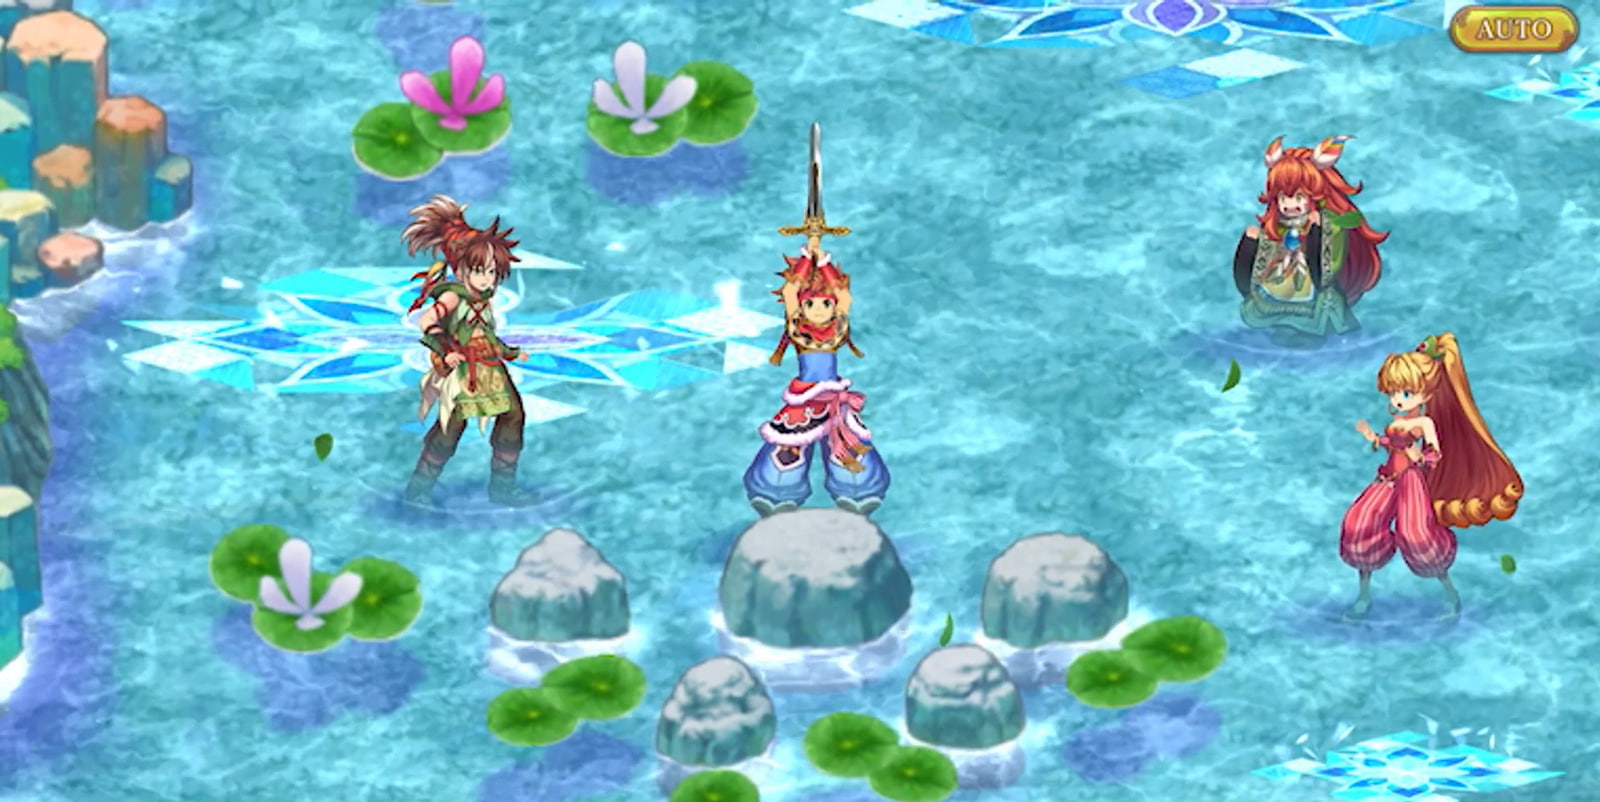 How To Unlock New Characters in Echoes of Mana